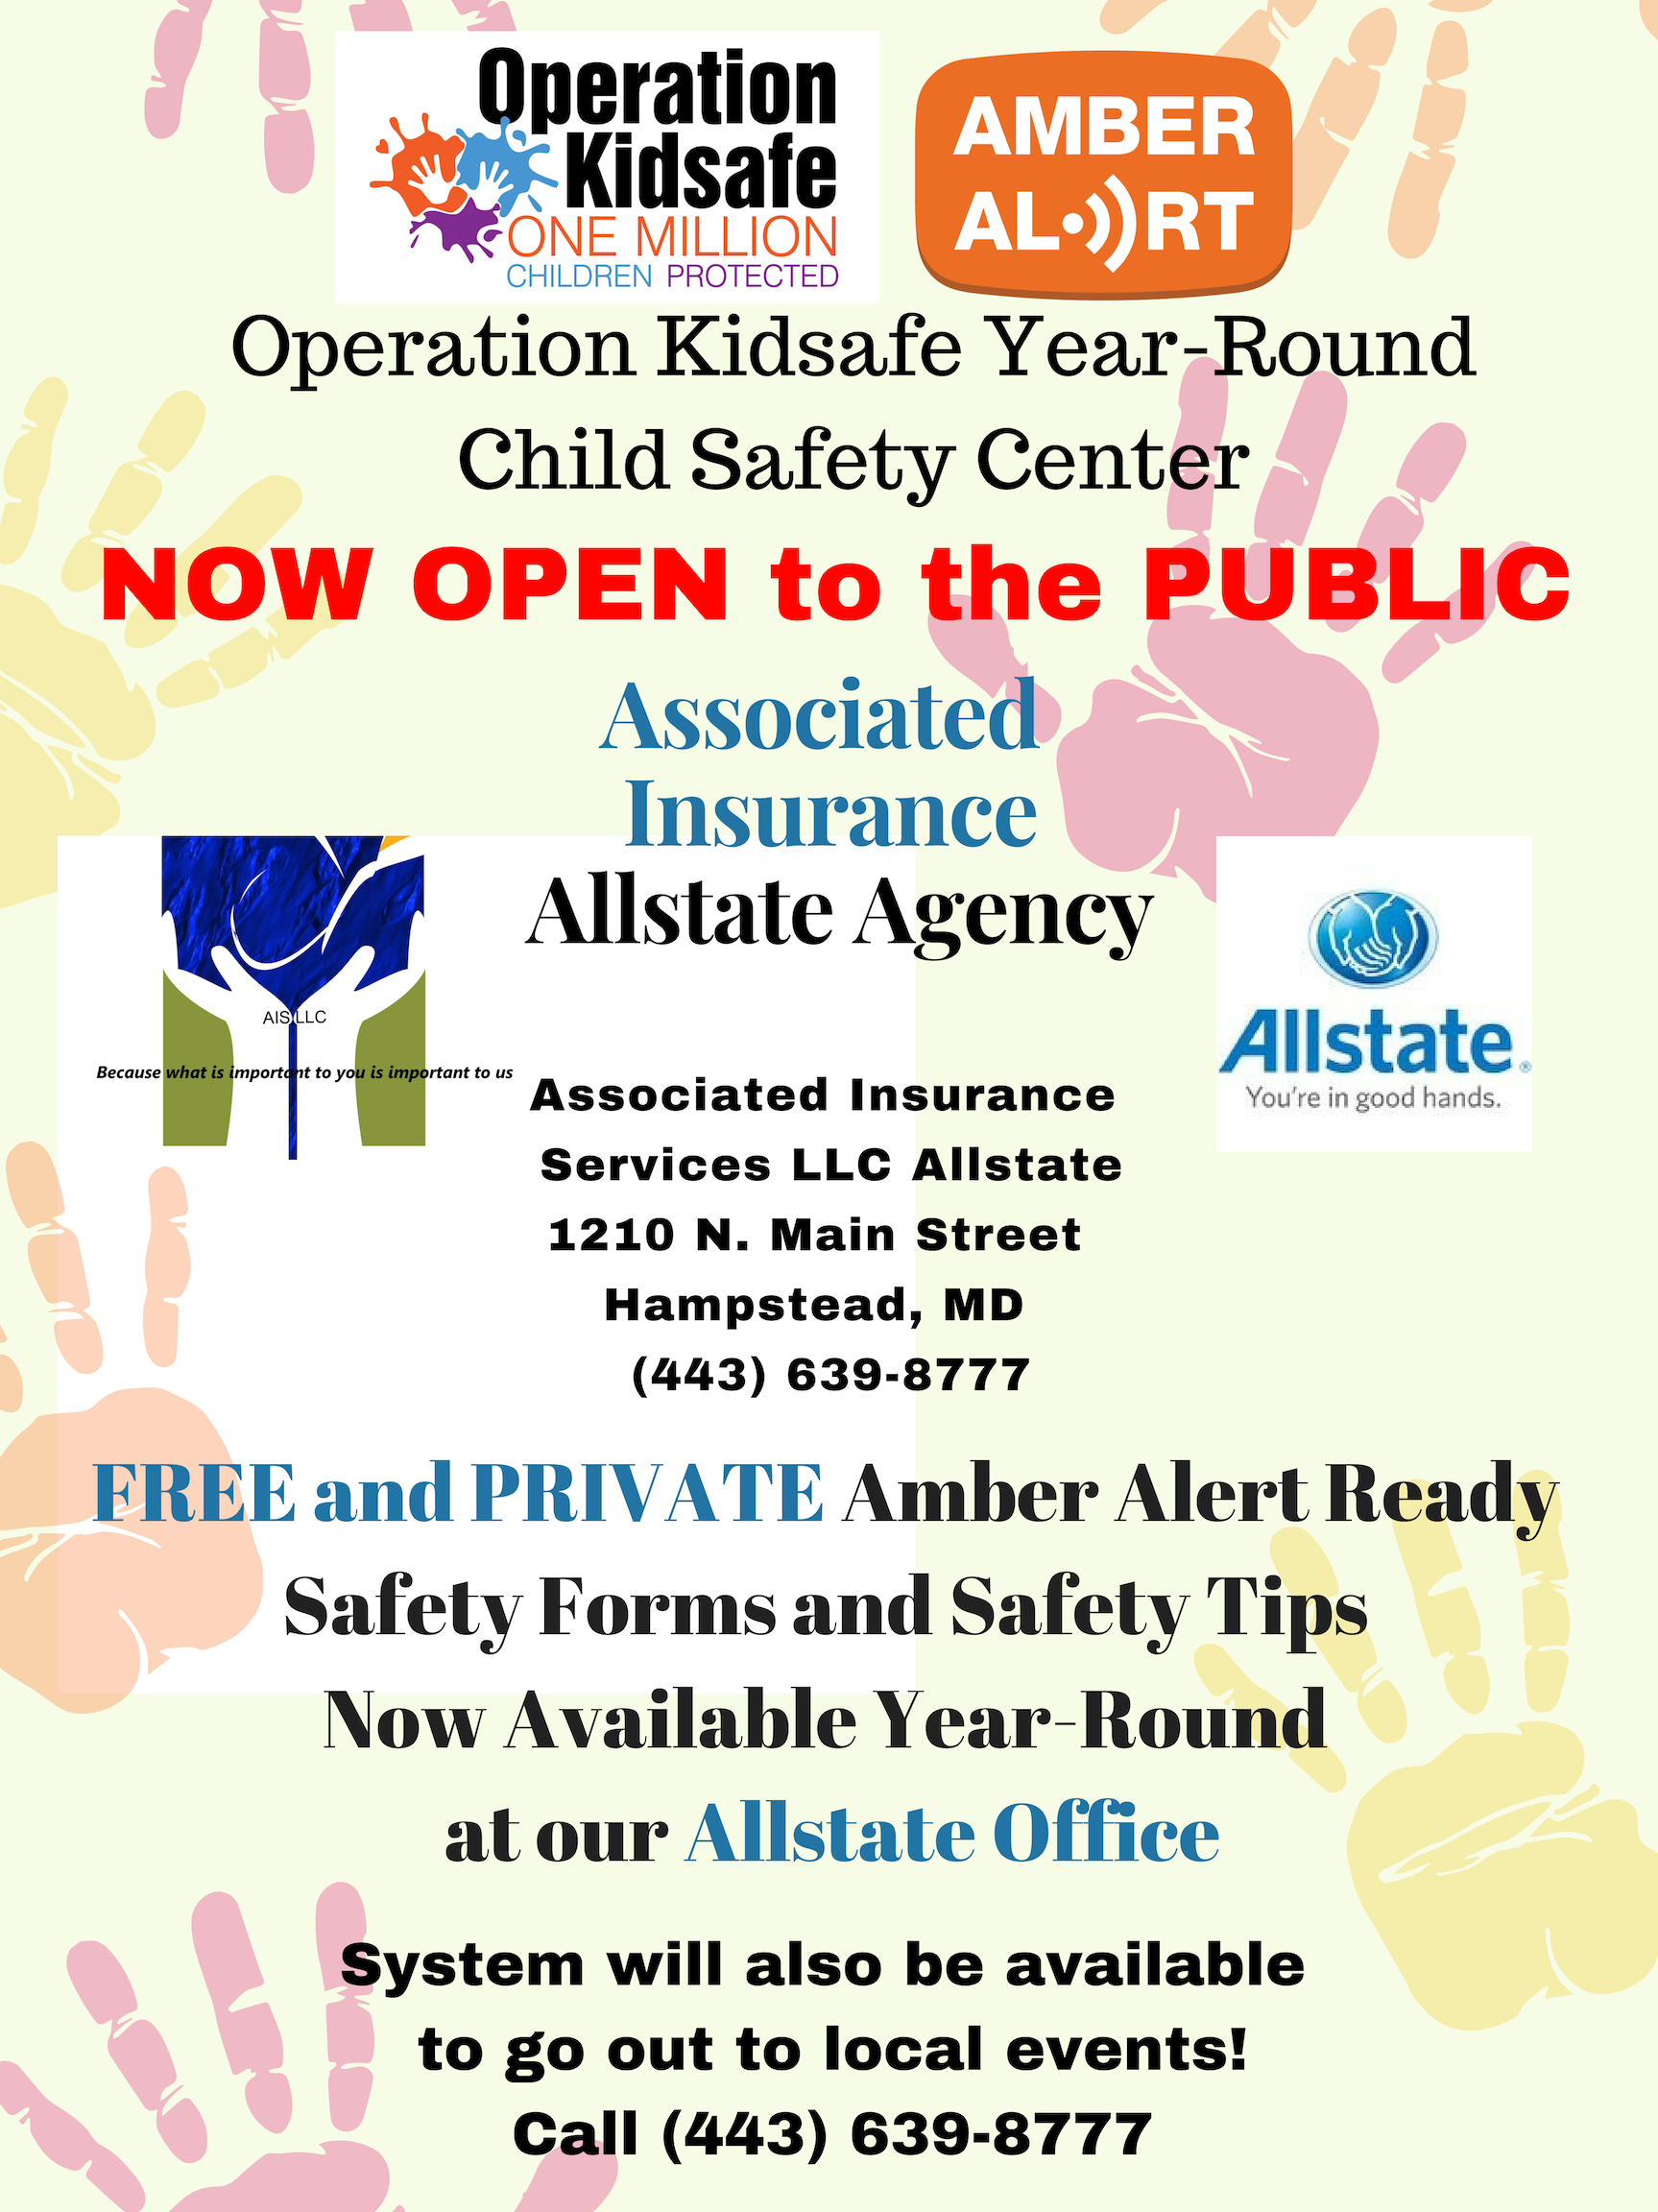 Allstate Car Insurance in Hampstead, MD Associated Insurance Services